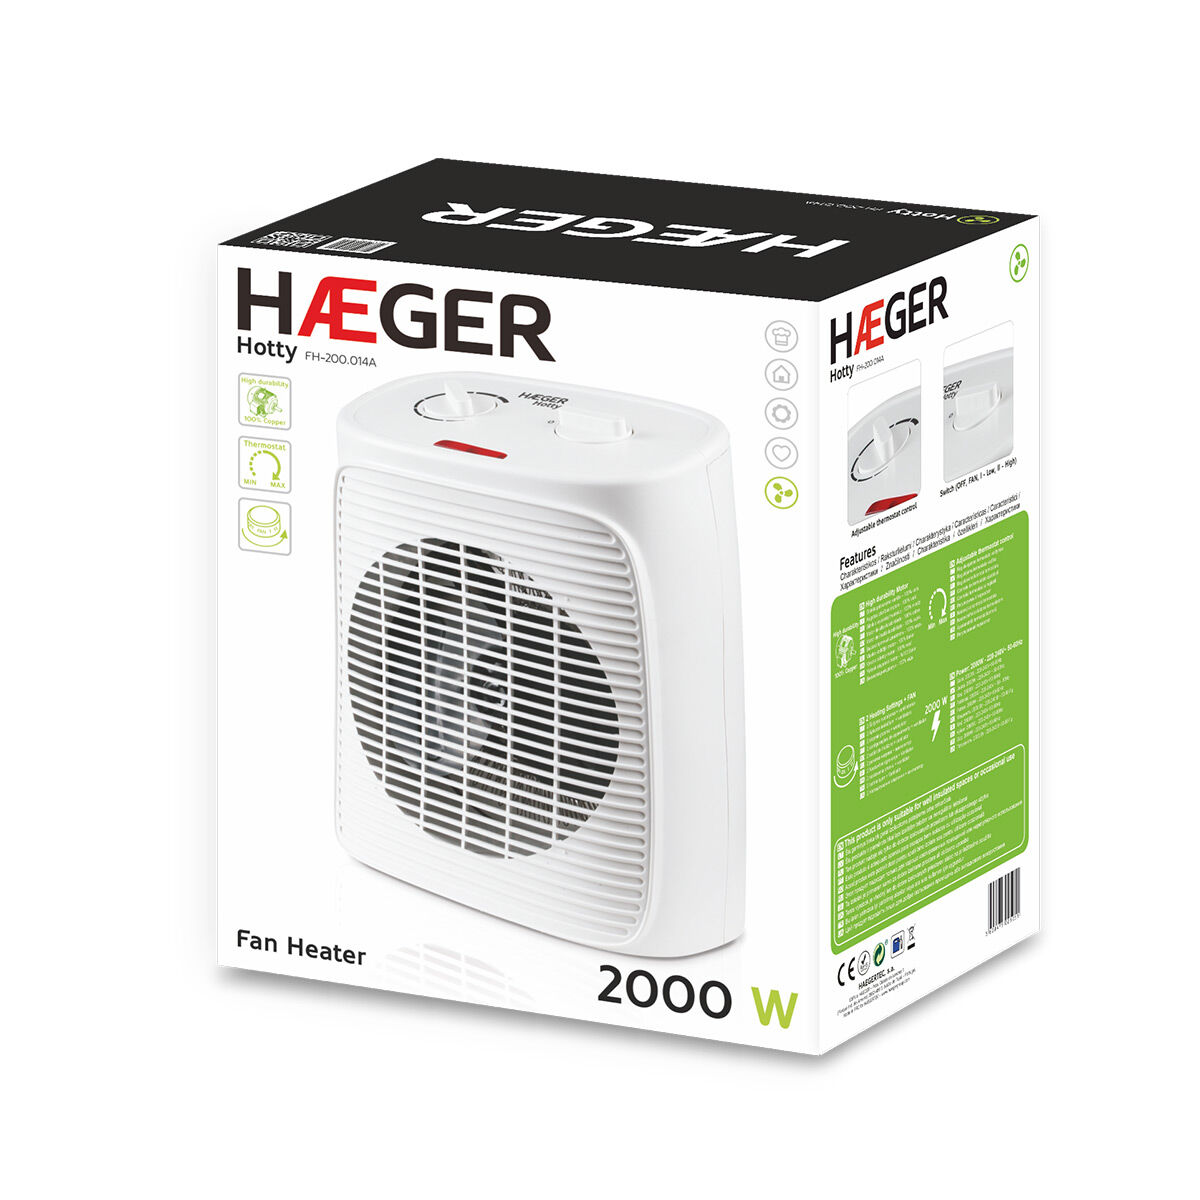 Thermo Ventilateur Portable Haeger Hotty Blanc 2000 W